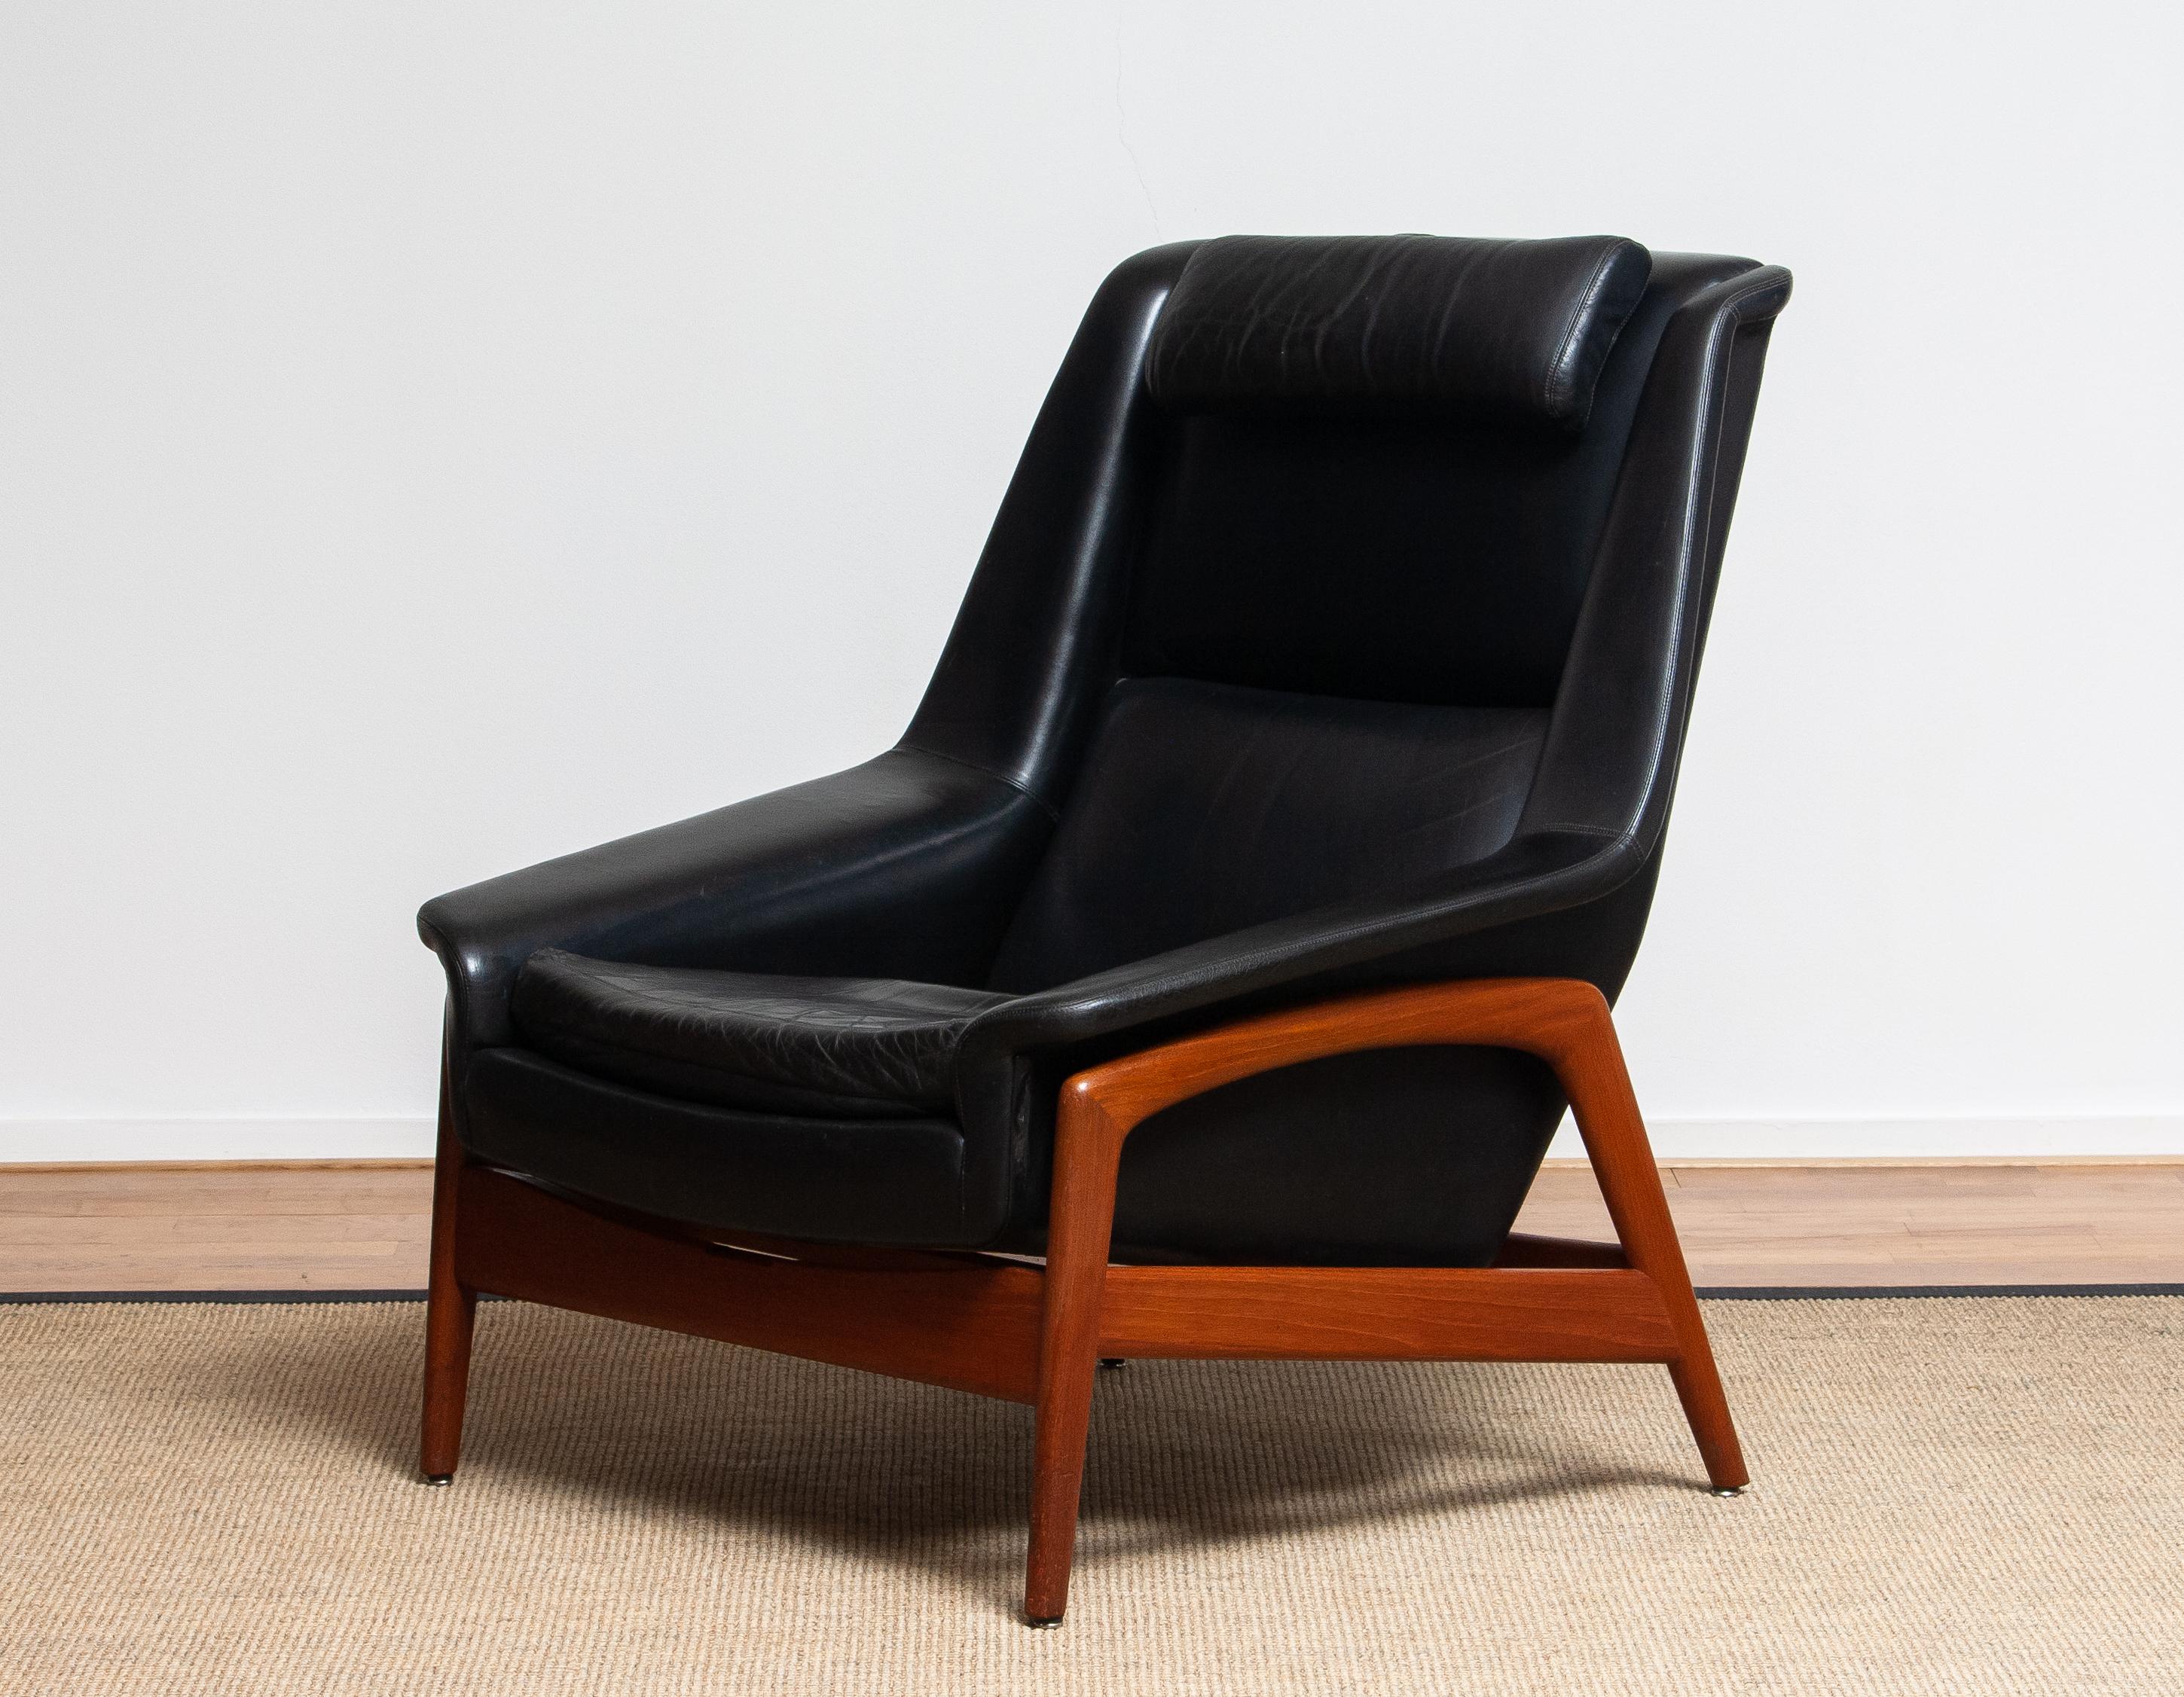 1960s, Lounge Chair Profil by Folke Ohlsson for DUX in Black Leather and Teak 1 4